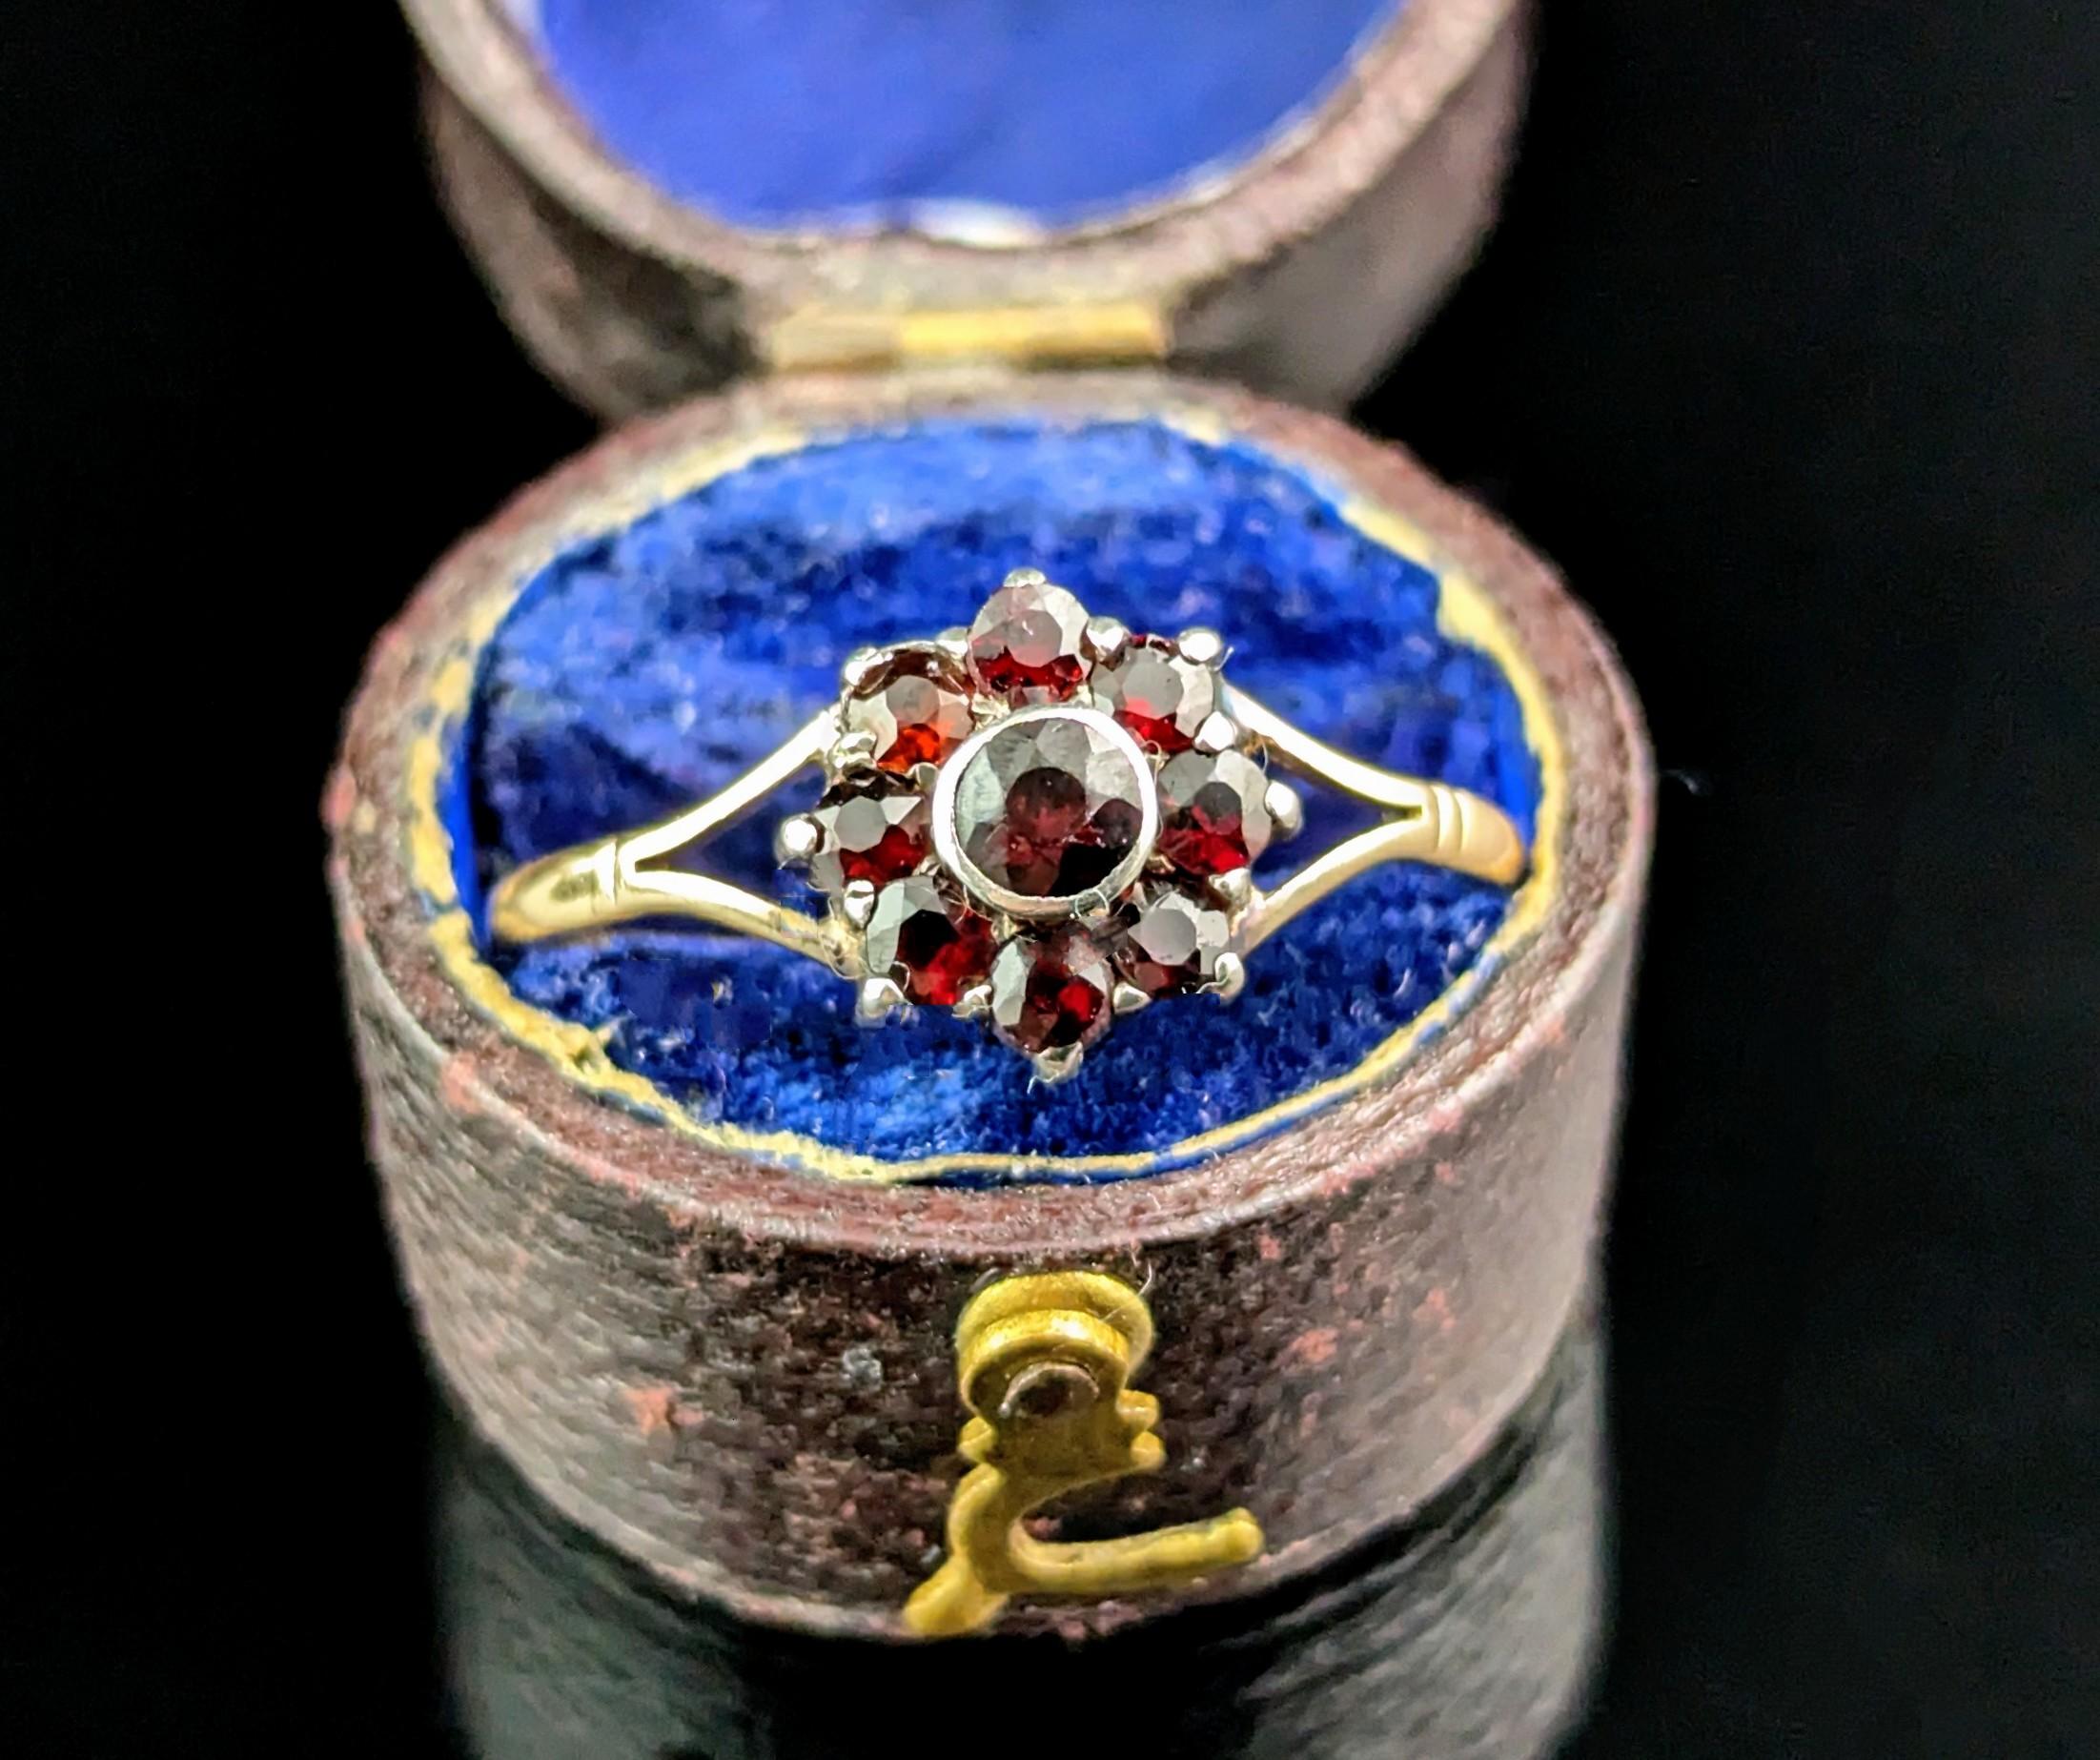 The sweetest antique Art Deco era garnet cluster ring.

It is made from 9ct gold and silver the bifurcated shoulders and band with a slight rosey hie, leading onto the pretty floral shaped face with rich deep red Garnets set into sterling